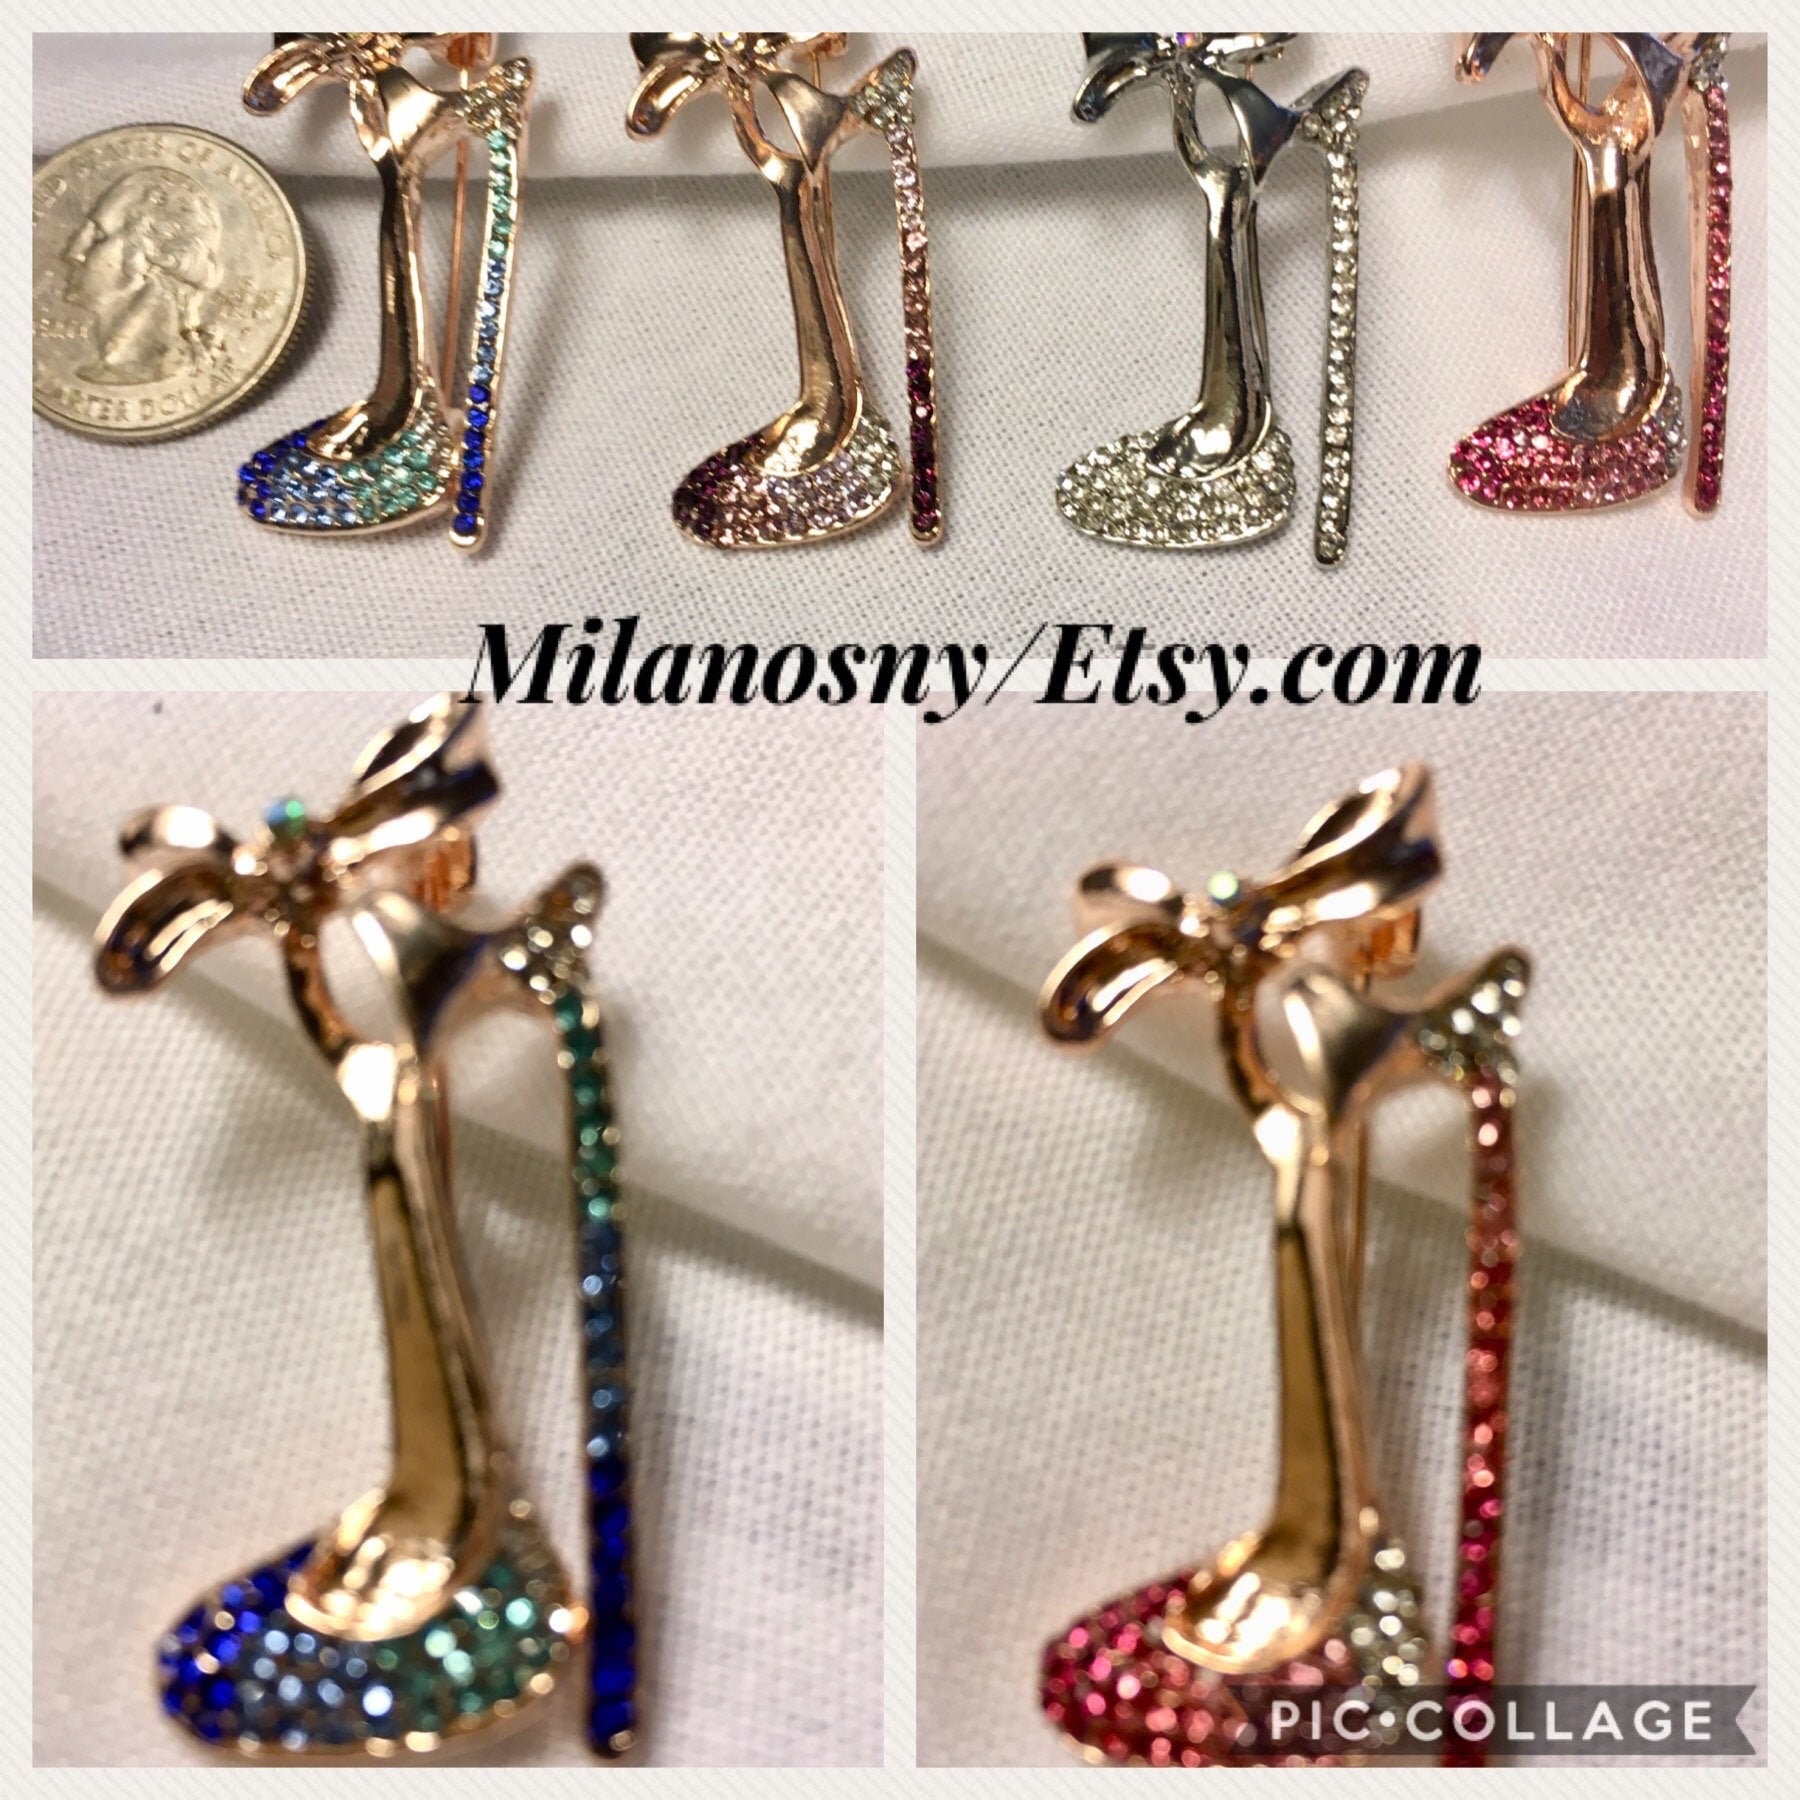 Pin on High heel shoes